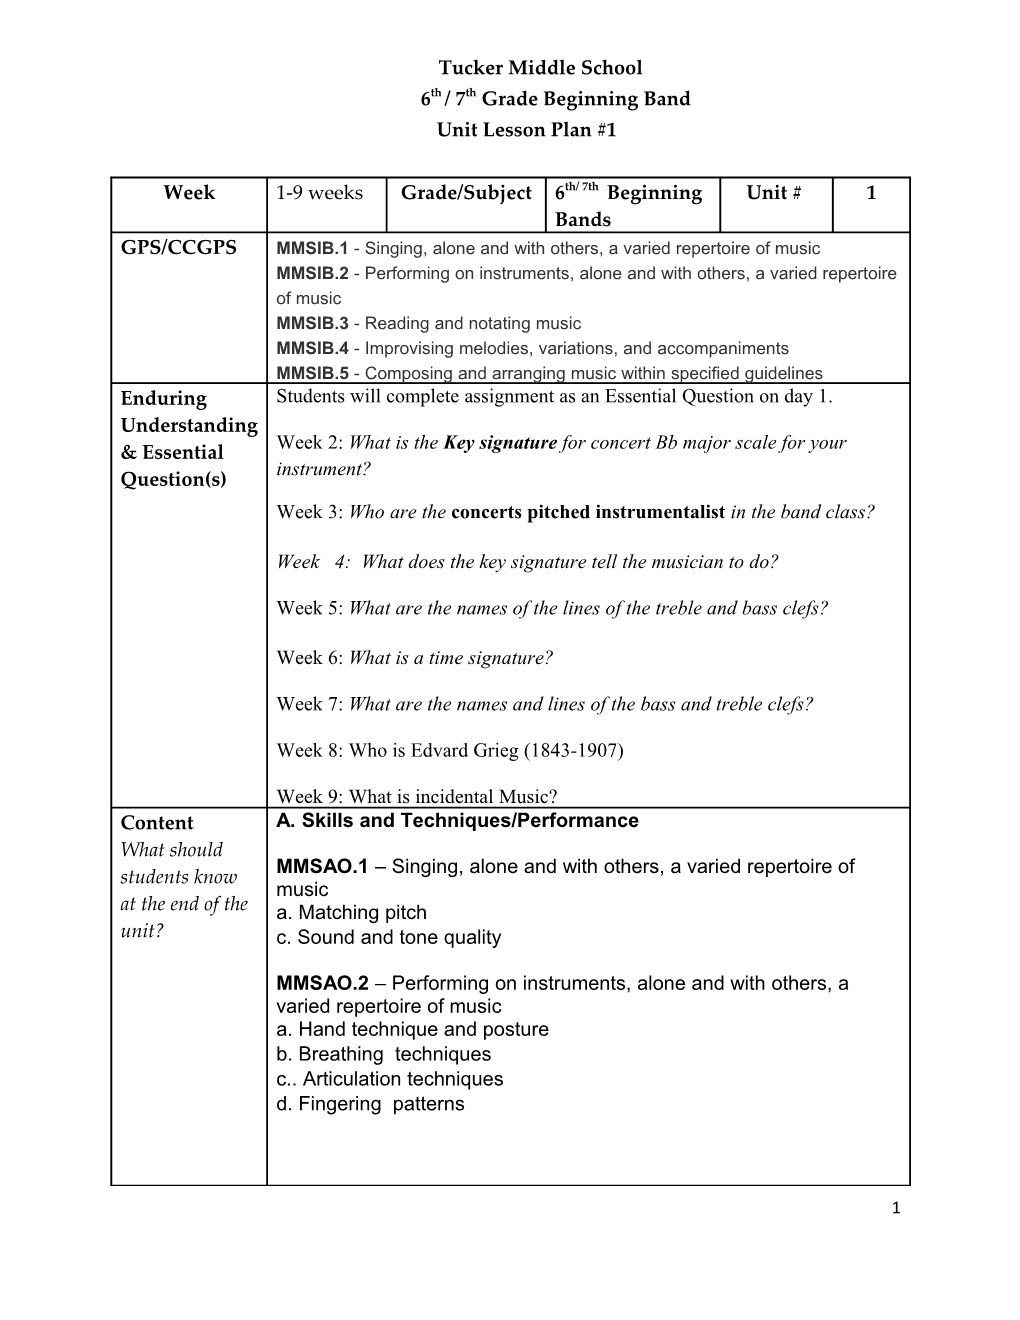 Lesson Plan Template for TMS Band Unit 1